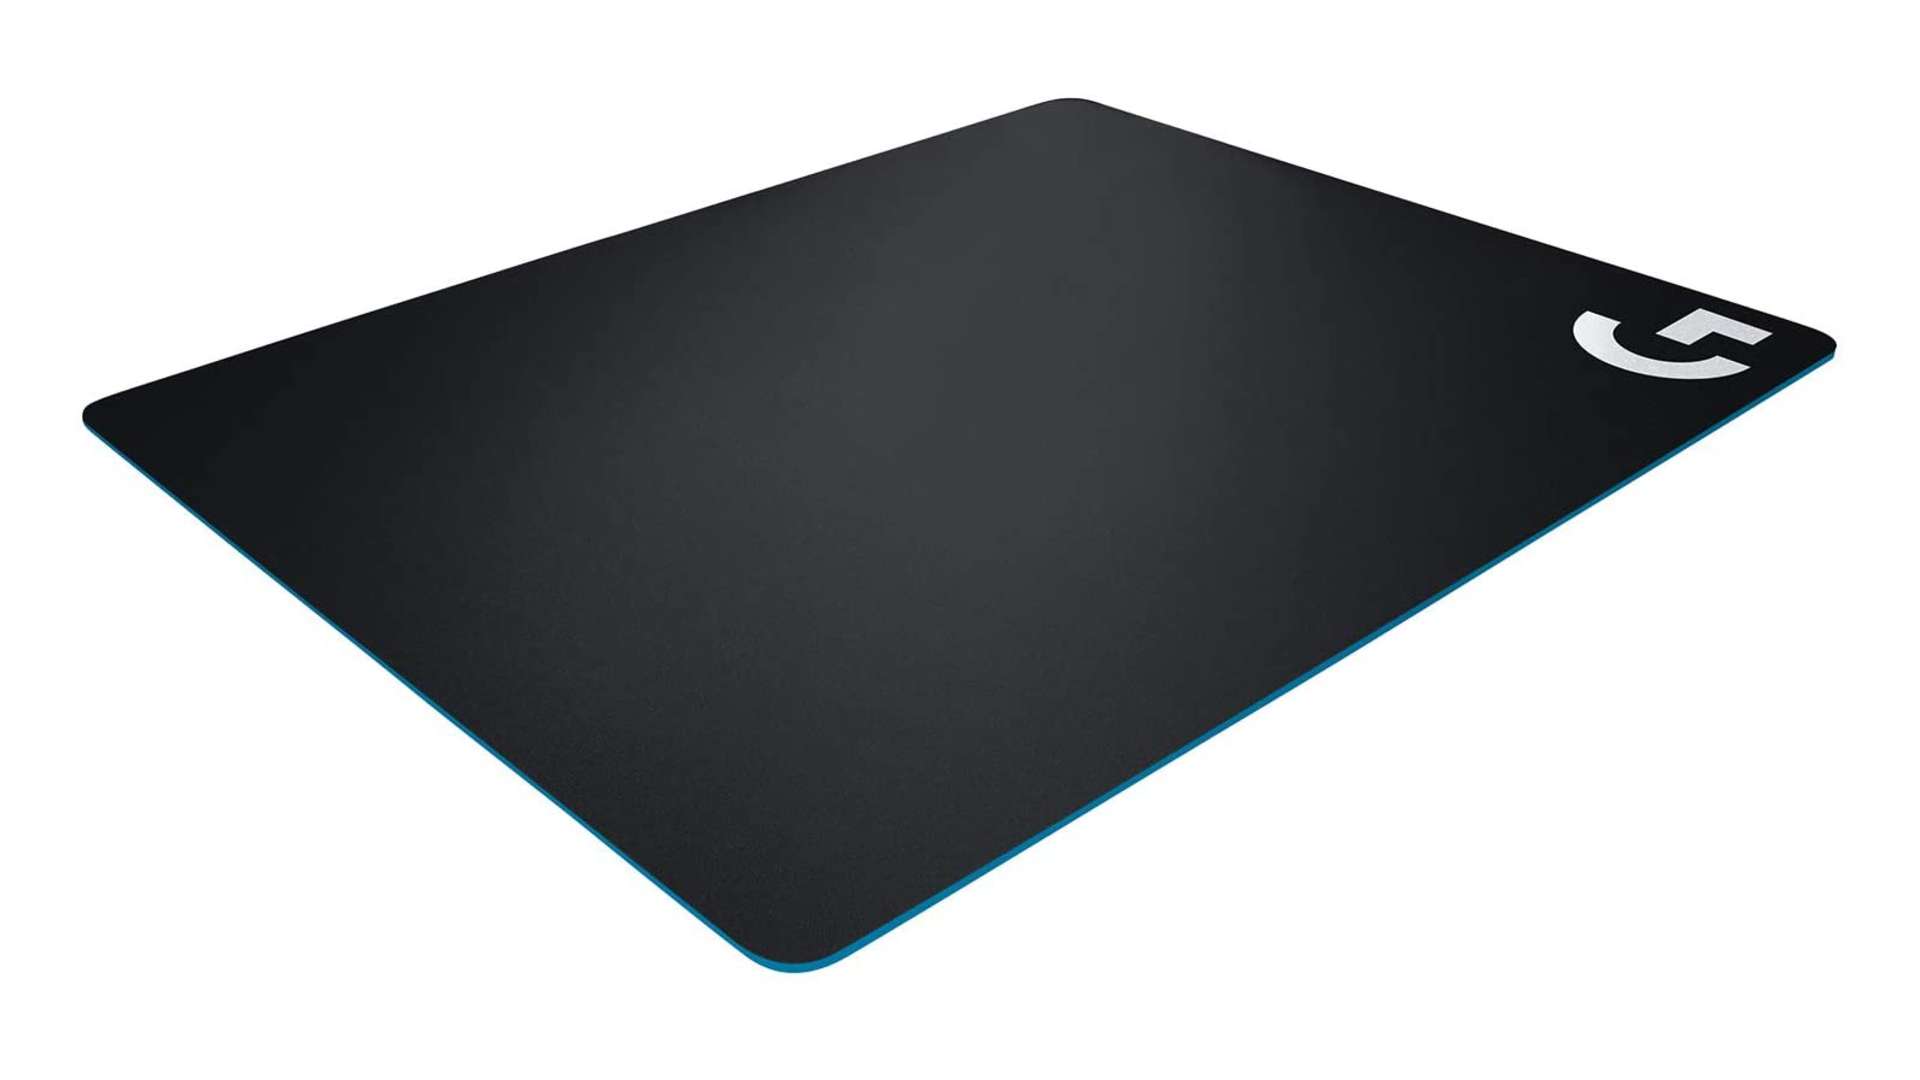 A black Logitech G440 mouse pad poses against a white background